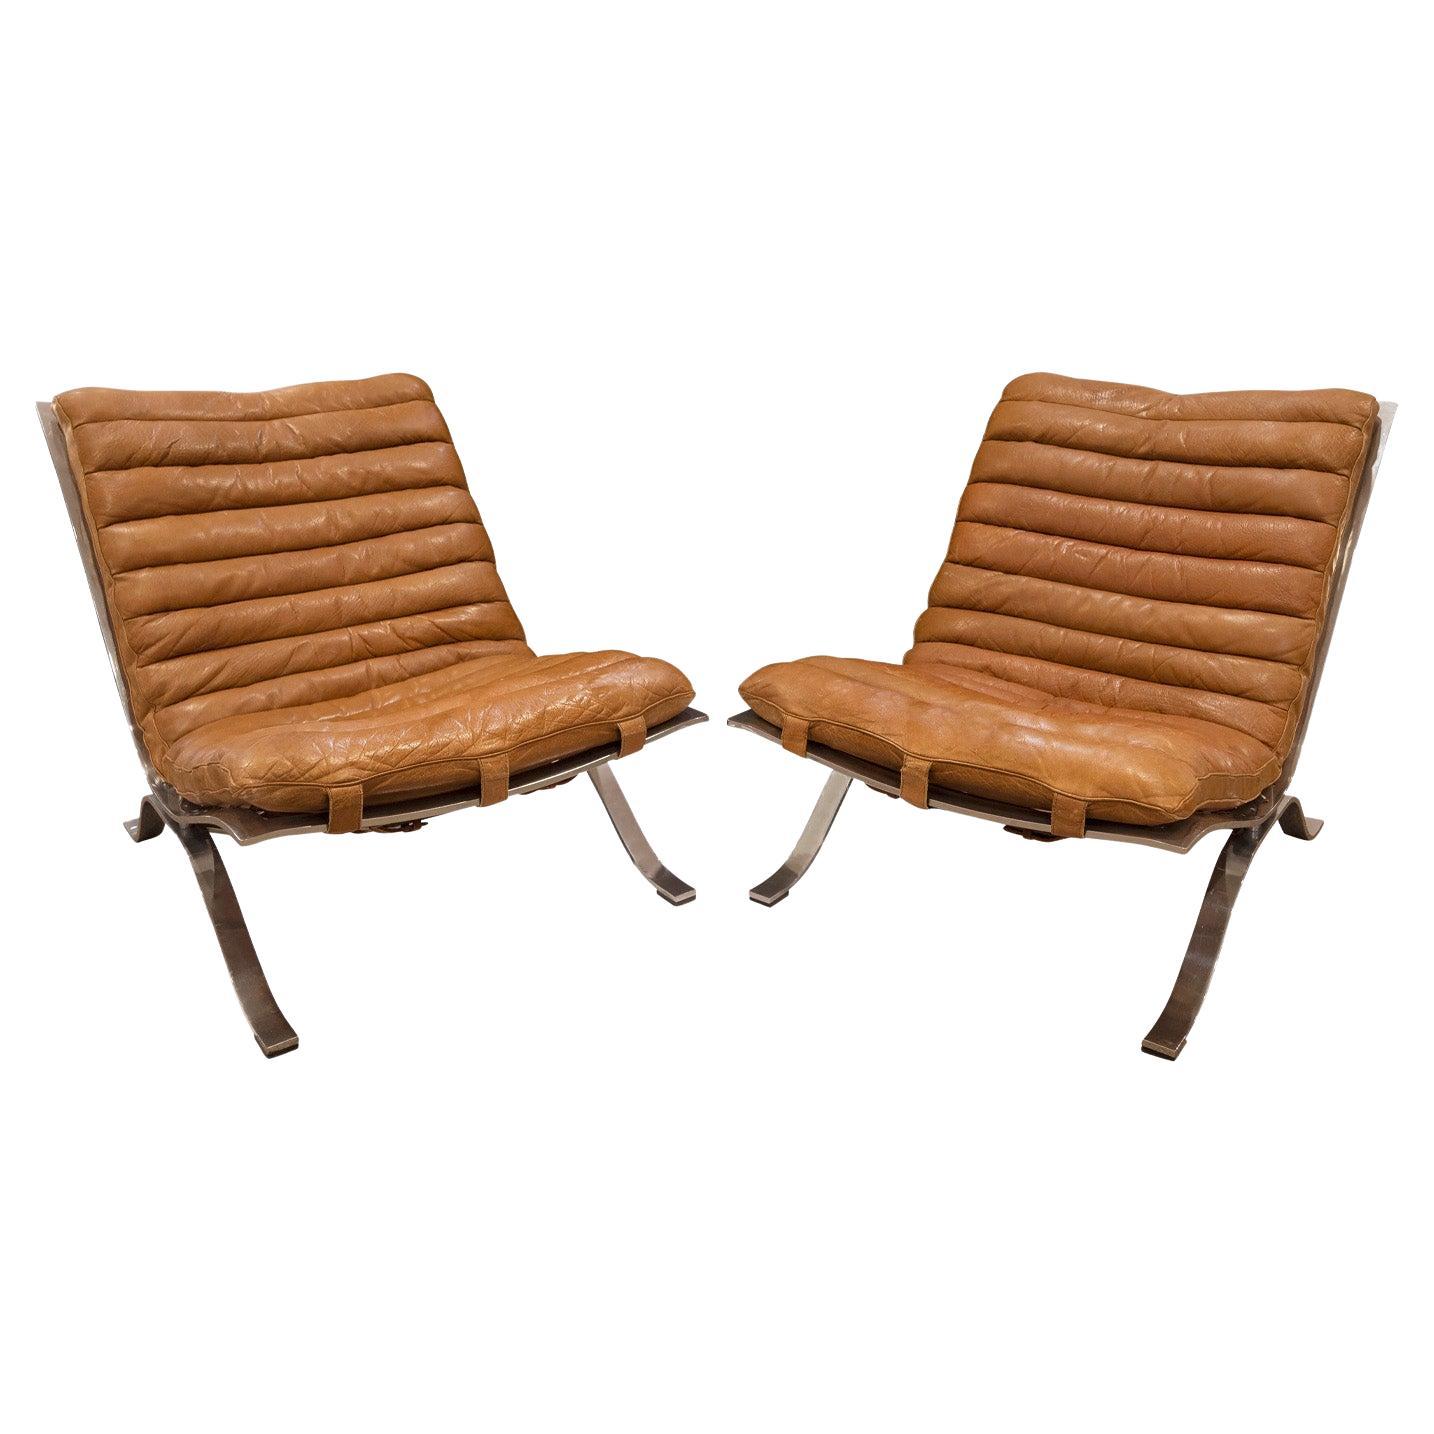 Arne Norell Pair of Lounge Chairs with Original Leather Slings 1960s (Signed) For Sale